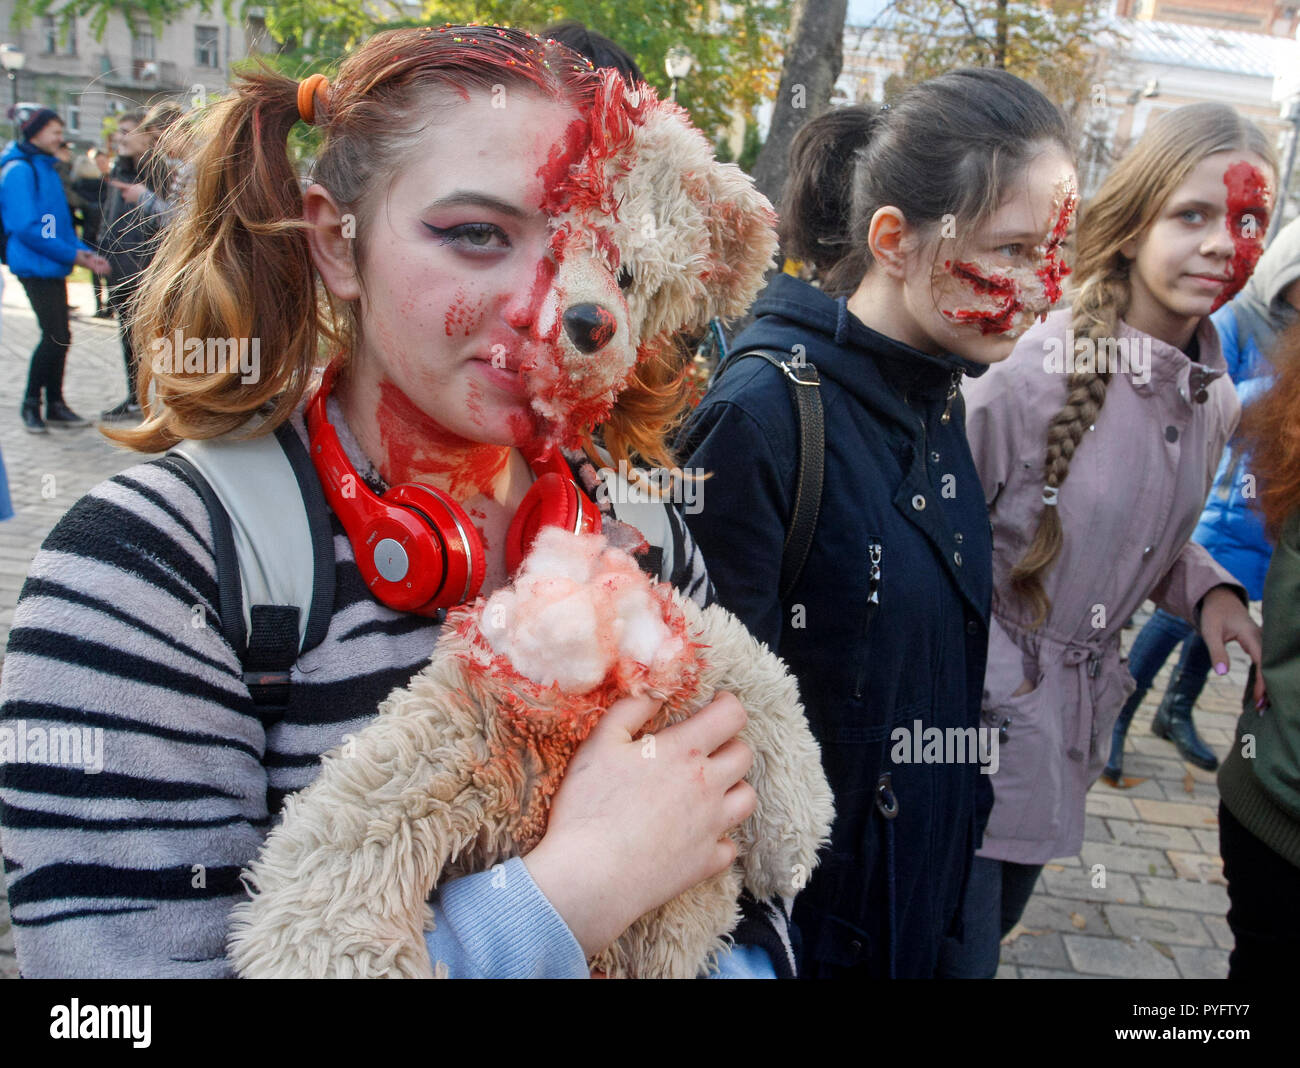 People are seen dressed in zombie costumes and make-up during the celebrations. Hundreds of people marched through the streets in Kiev downtown, on the eve of the Halloween zombie celebrations. Stock Photo